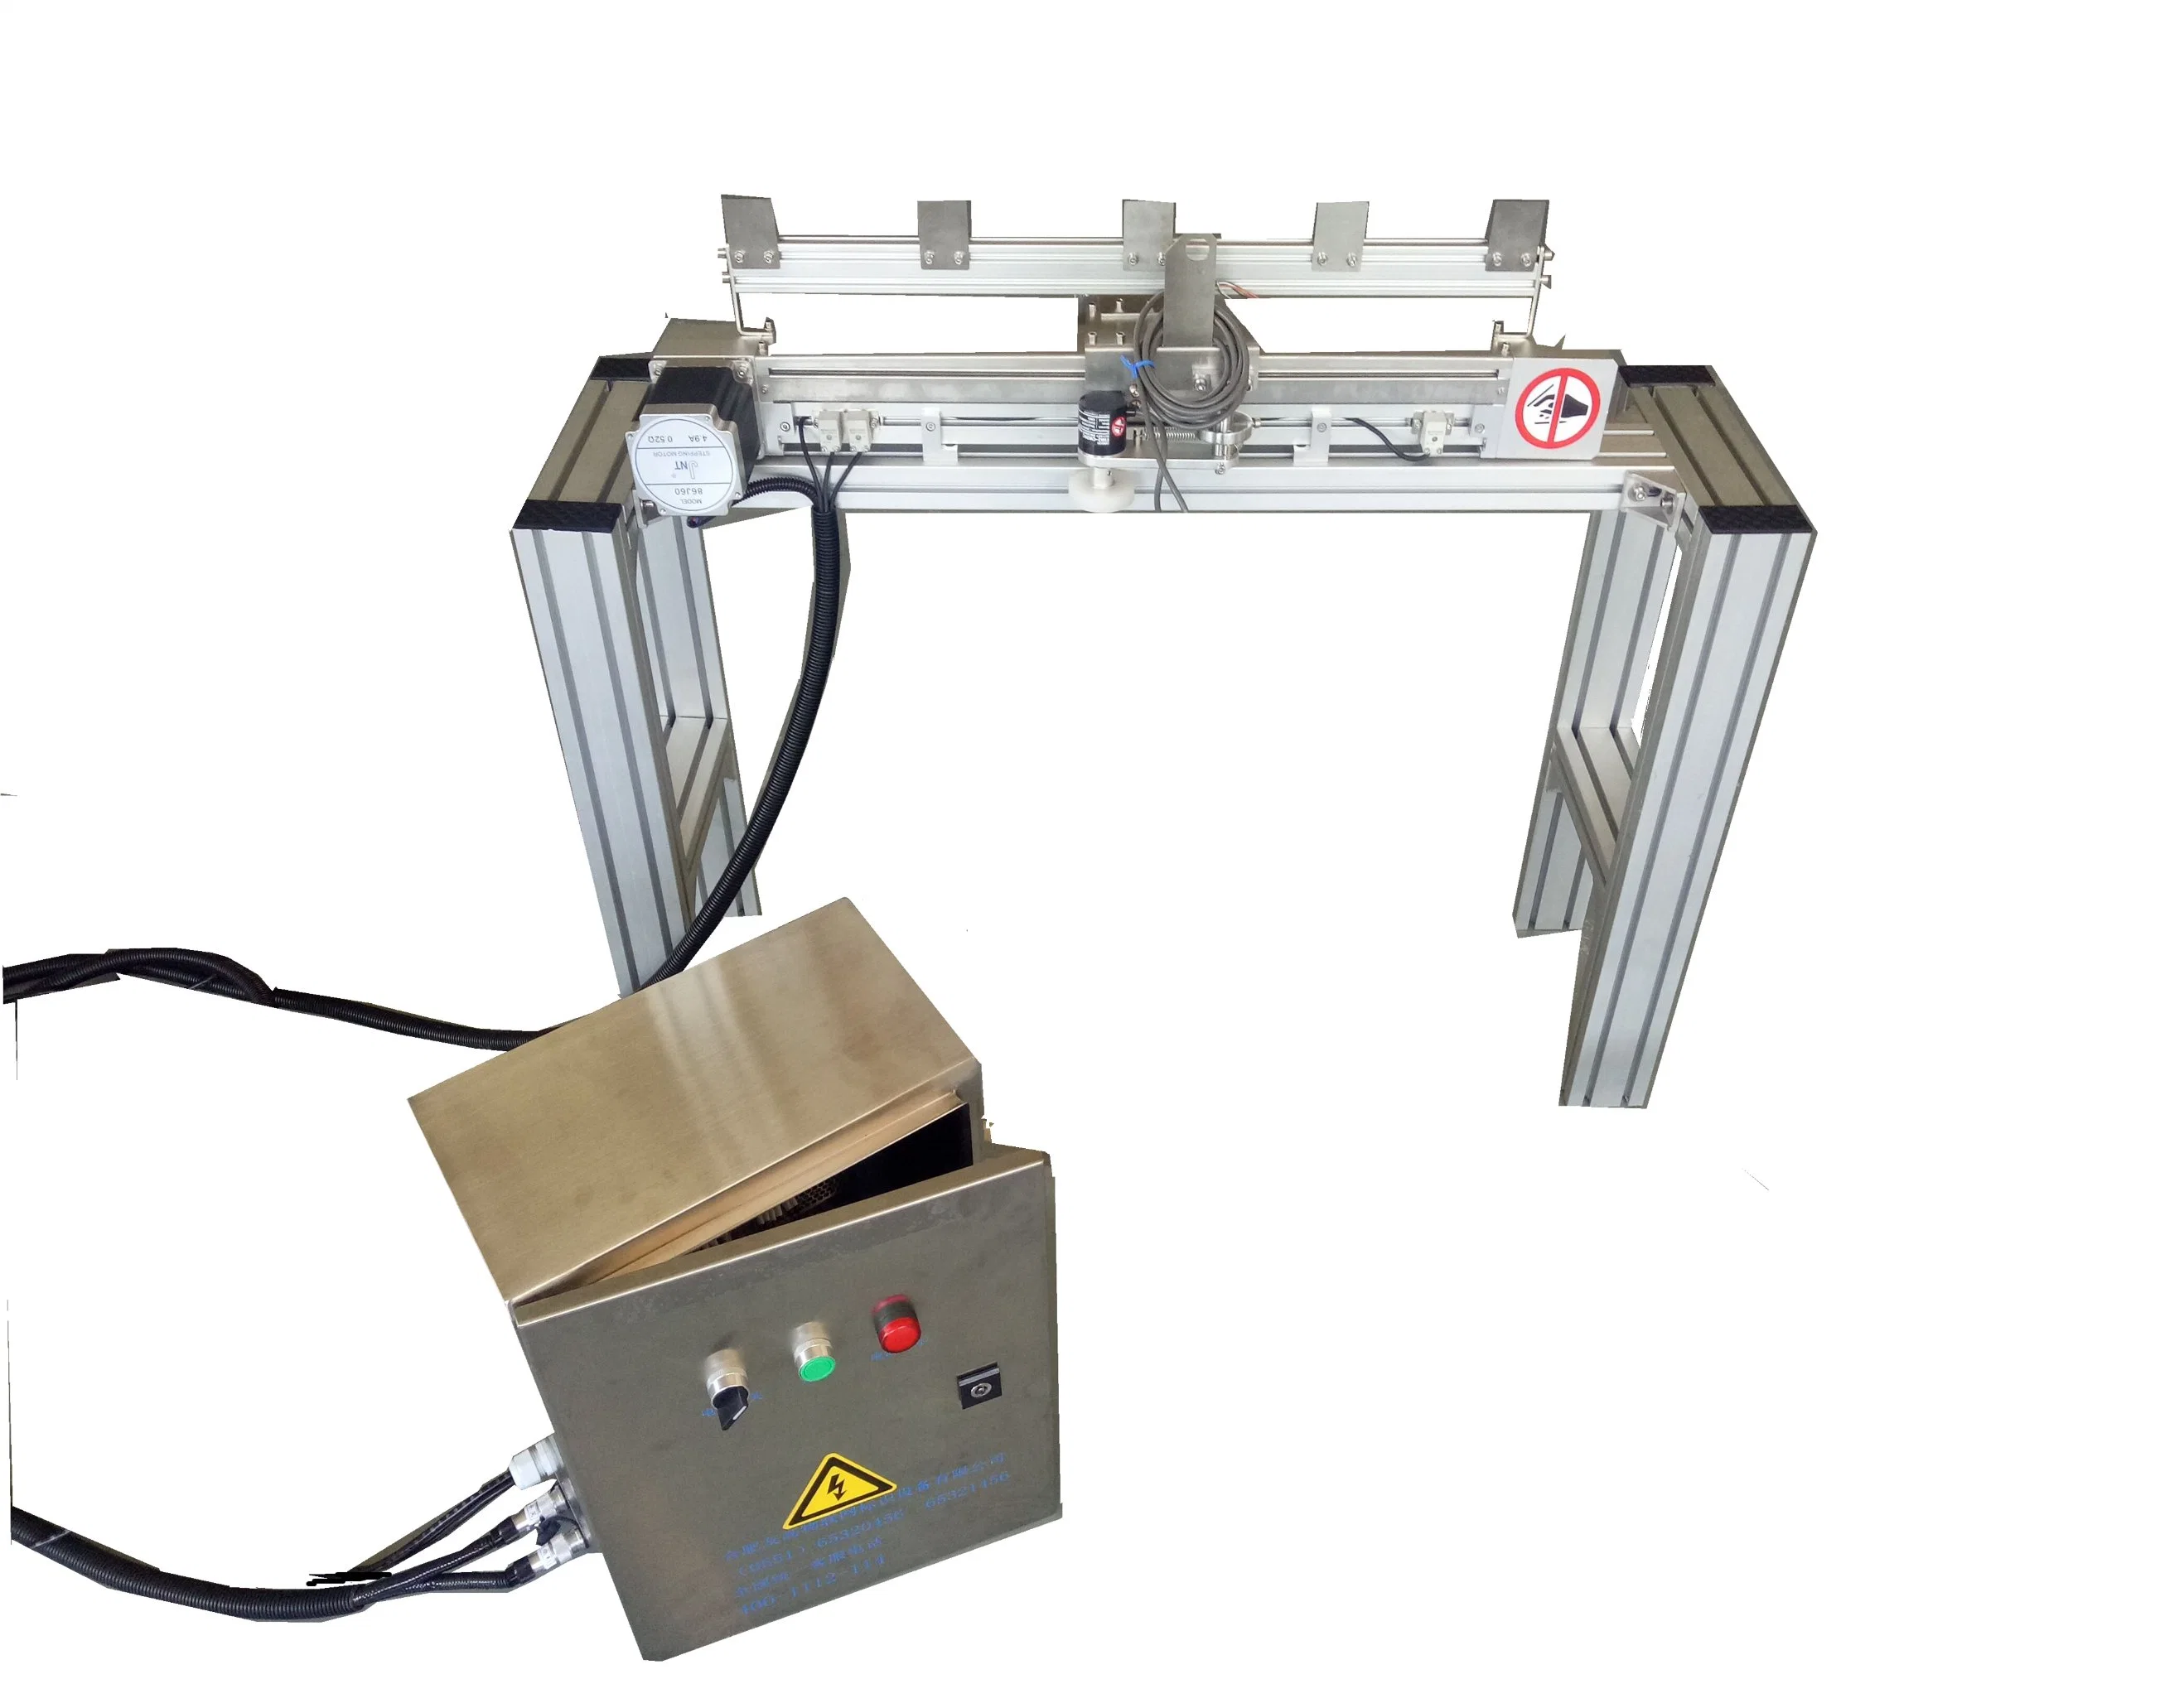 X Axis Traverse System for Inkjet Printer.